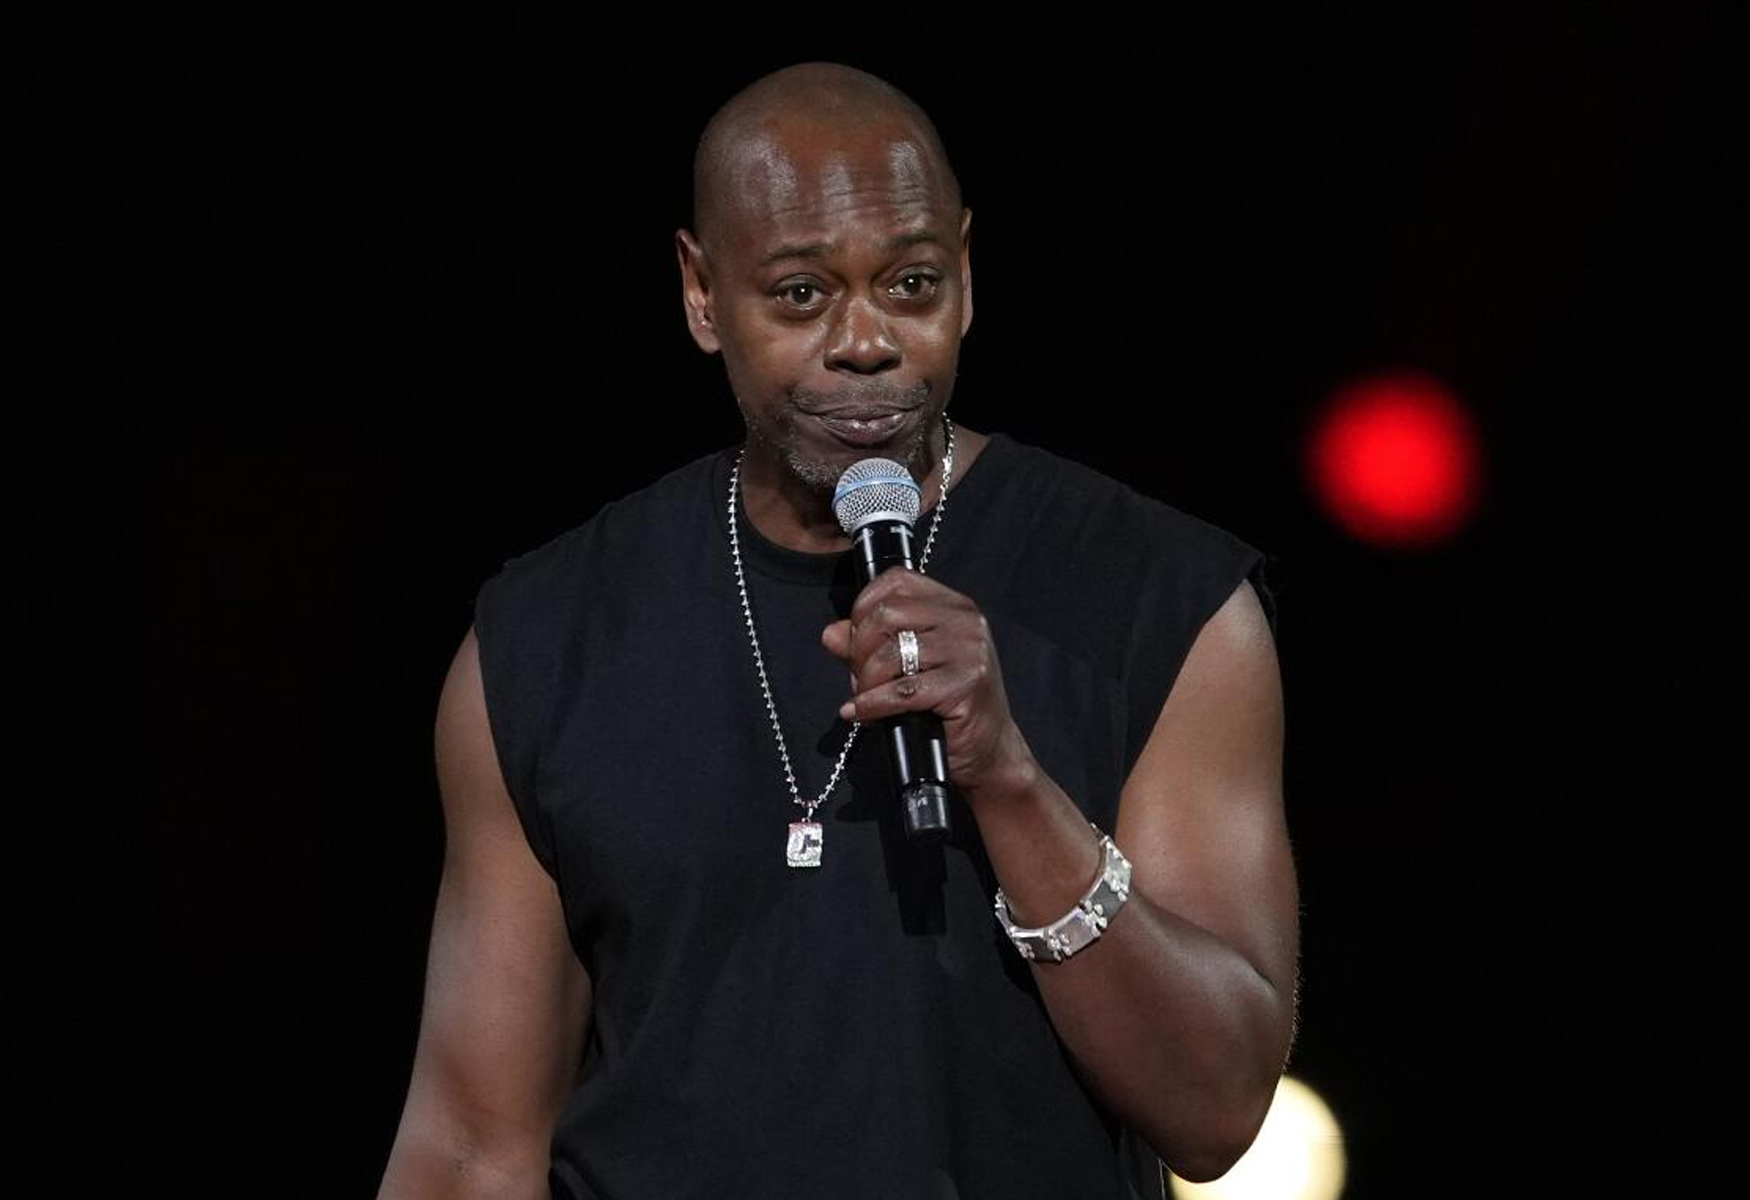 Dave Chappelle Receives Invitation To Talk With Jewish Group Following Controversial Remarks About Israel